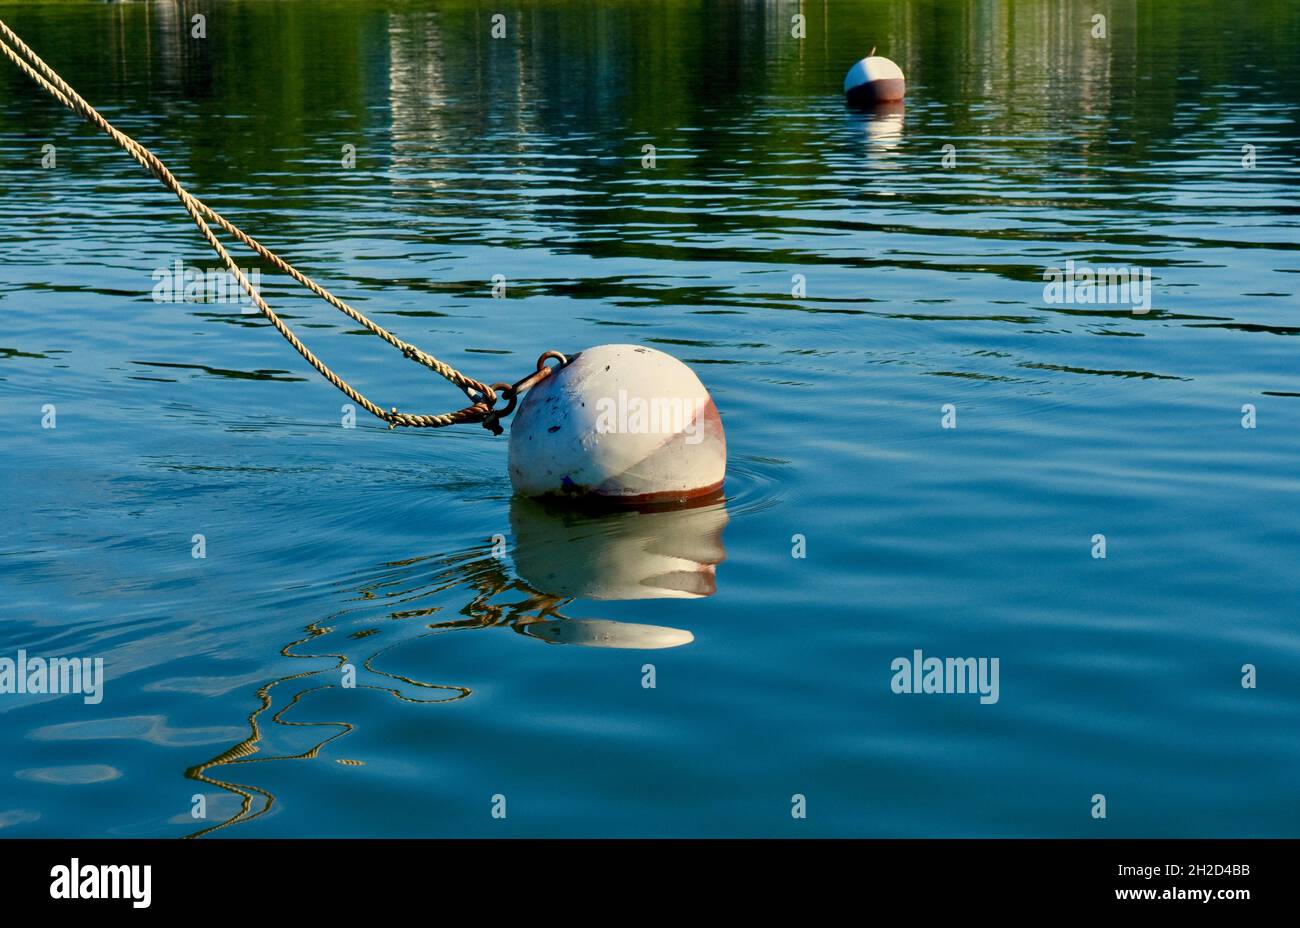 Mooring ball anchoring lines from a unseen boat. Water is a vivid blue with interesting surface patterns. Copy space. Background. Stock Photo